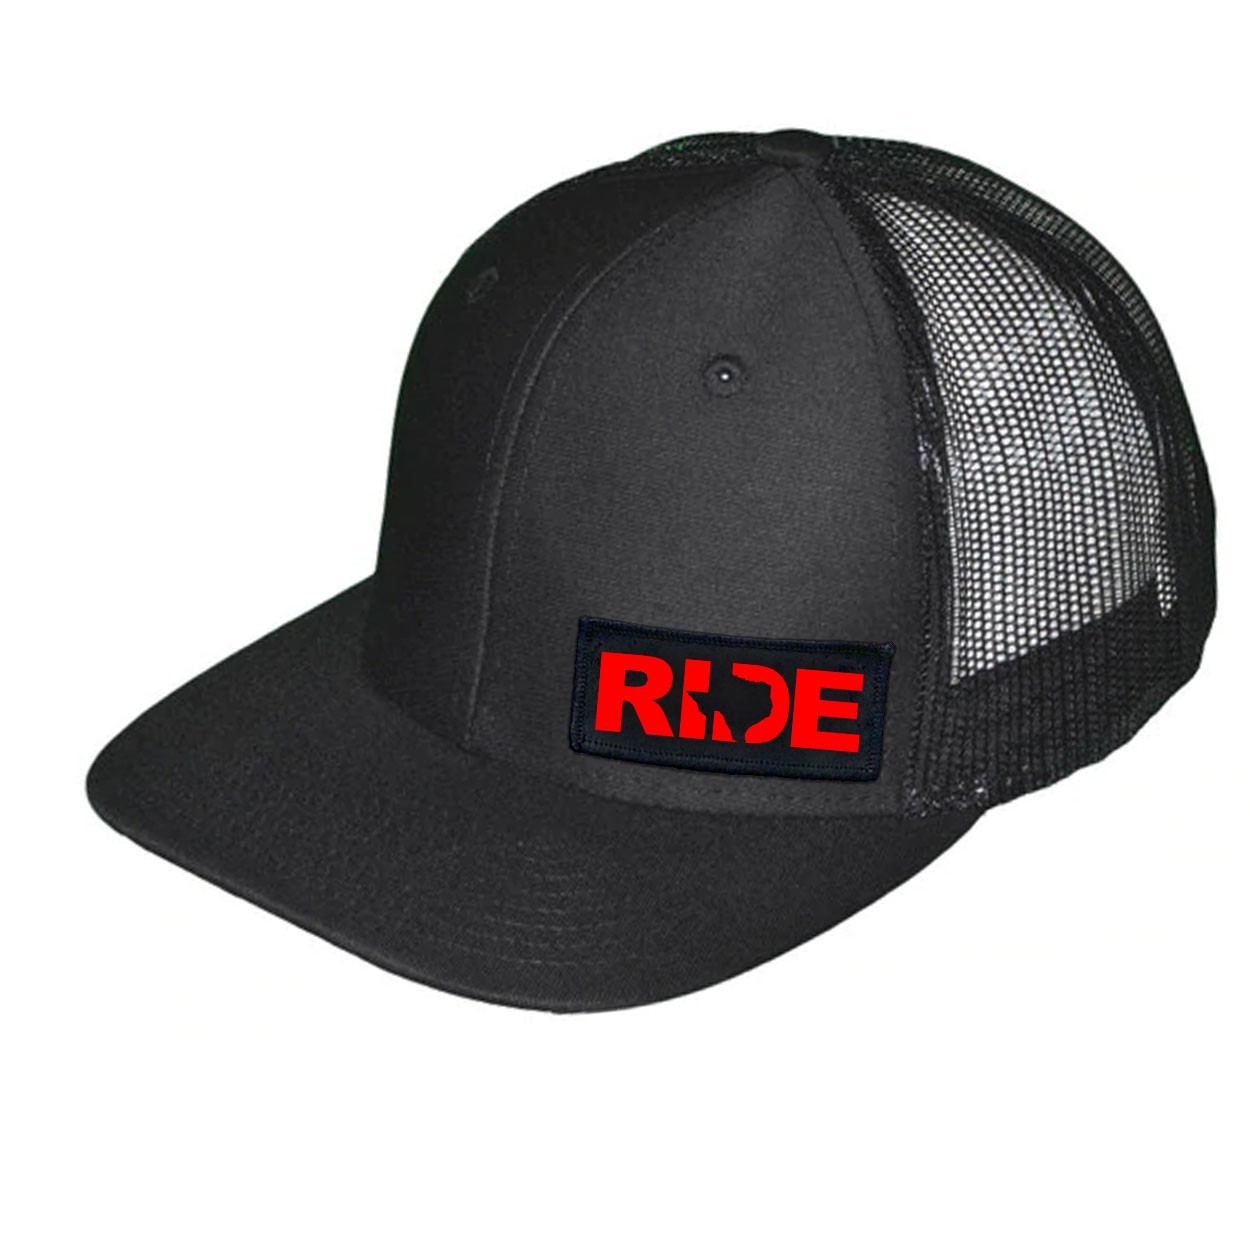 Ride Texas Night Out Woven Patch Snapback Trucker Hat Black (Red Logo)